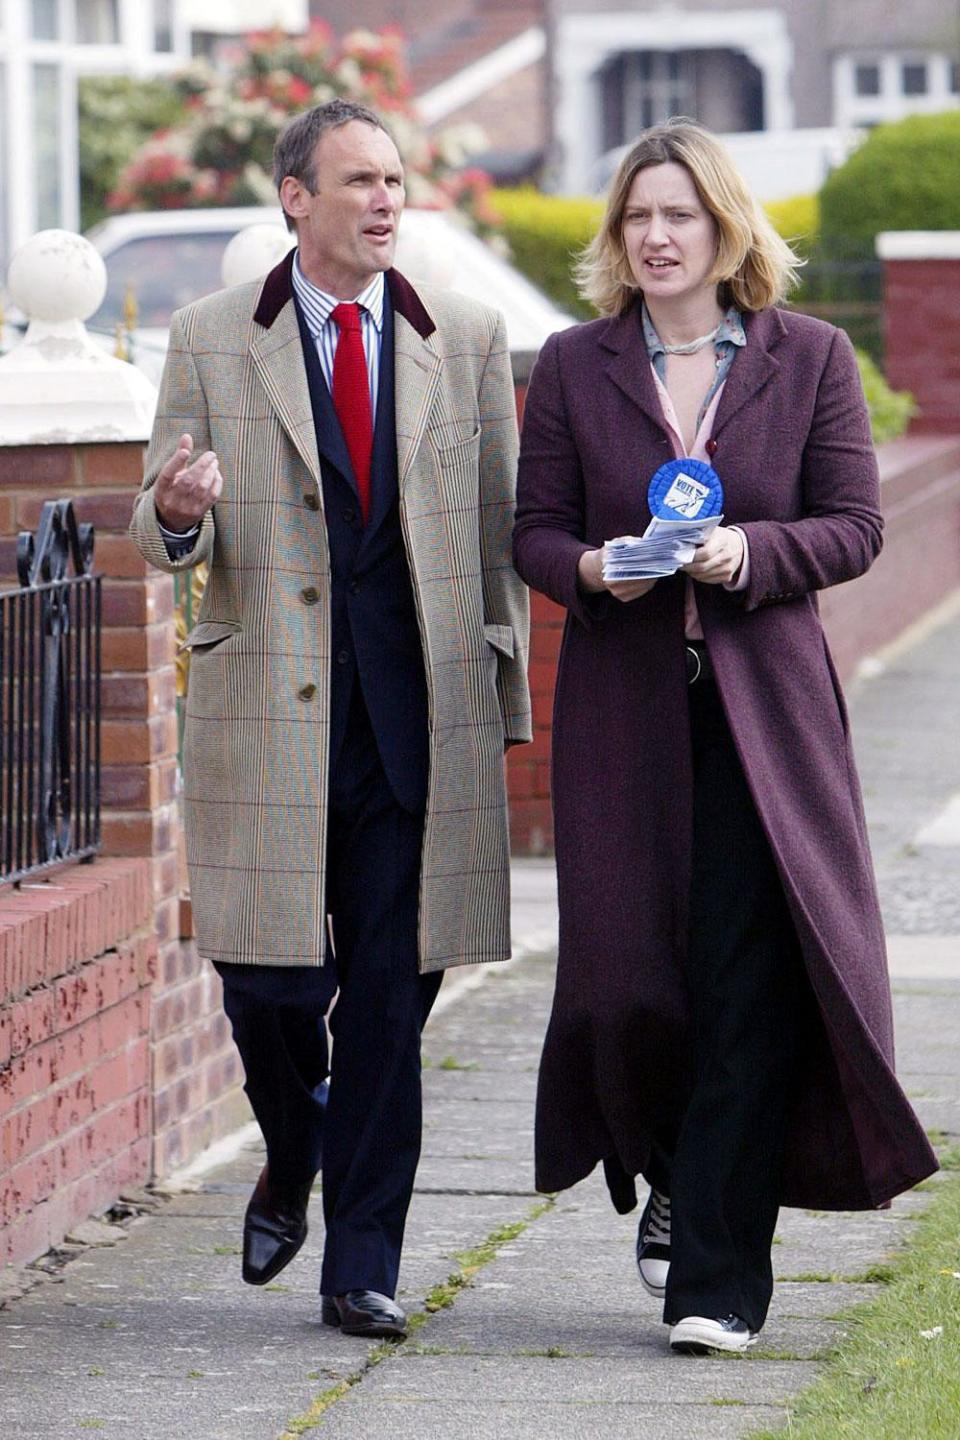 Amber Rudd and AA Gill, helping her political campaign in 2005. The pair became friends again after the break-up in 1995. (Reuters)